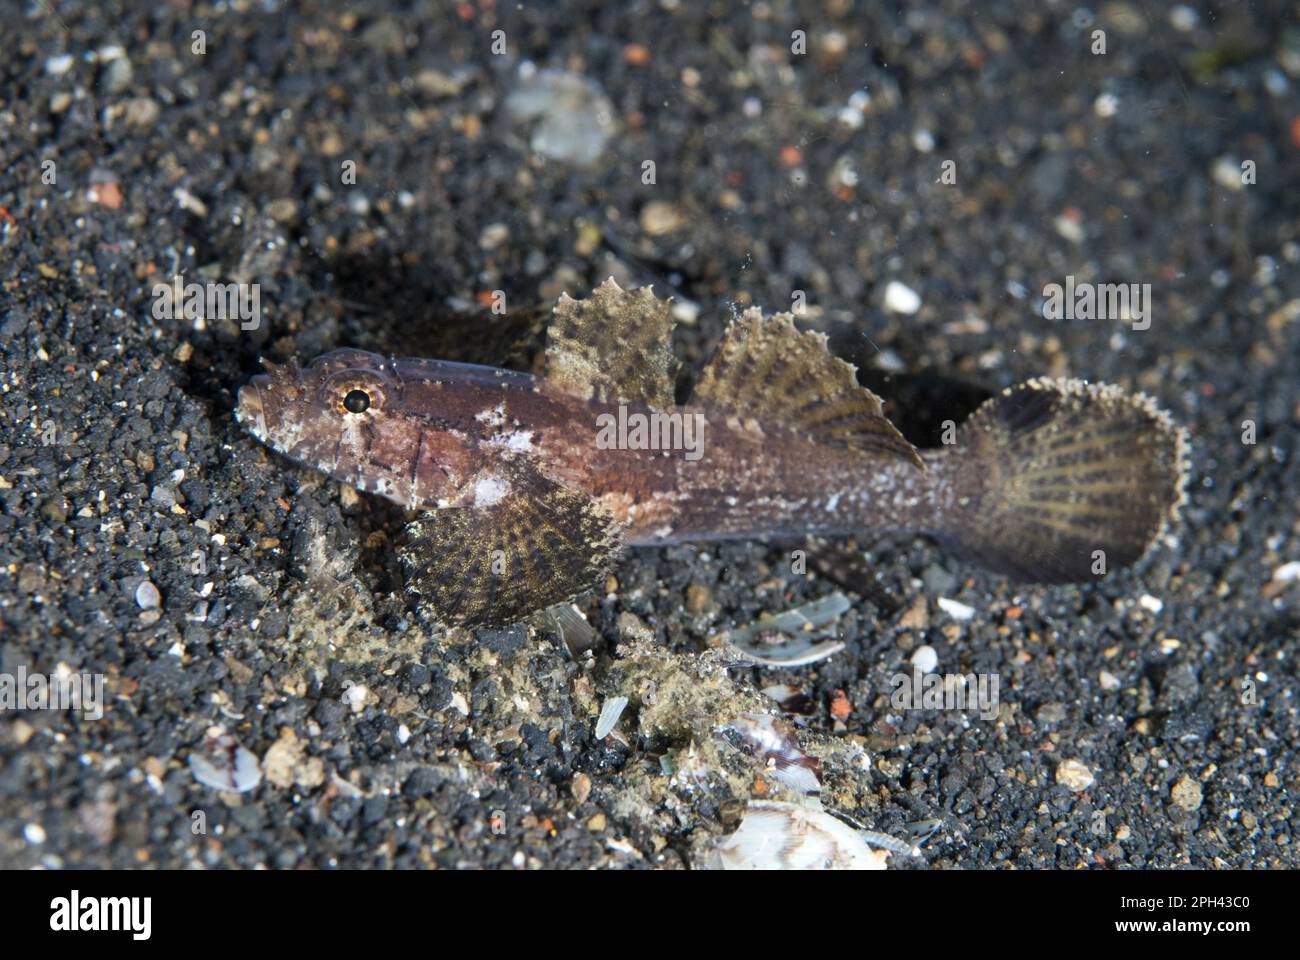 Hasselt's Goby, Hasselt's Goby, Hasselt's Gobies, Other Animals, Fish, Animals, Gobies, Banded Flap-head Goby (Callogobius hasseltii) adult, resting Stock Photo